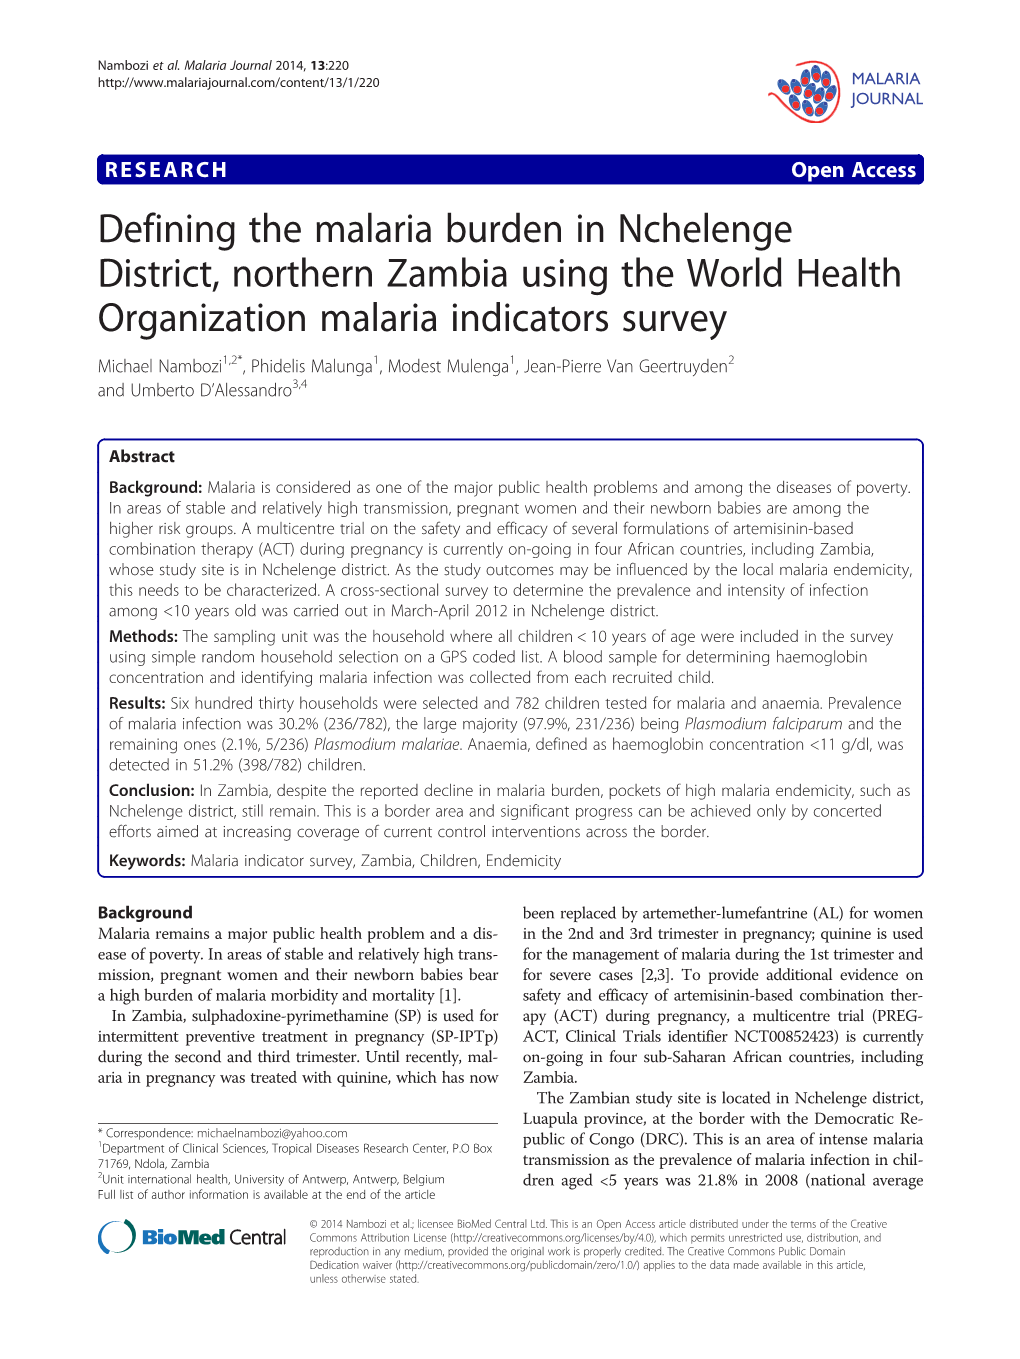 Defining the Malaria Burden in Nchelenge District, Northern